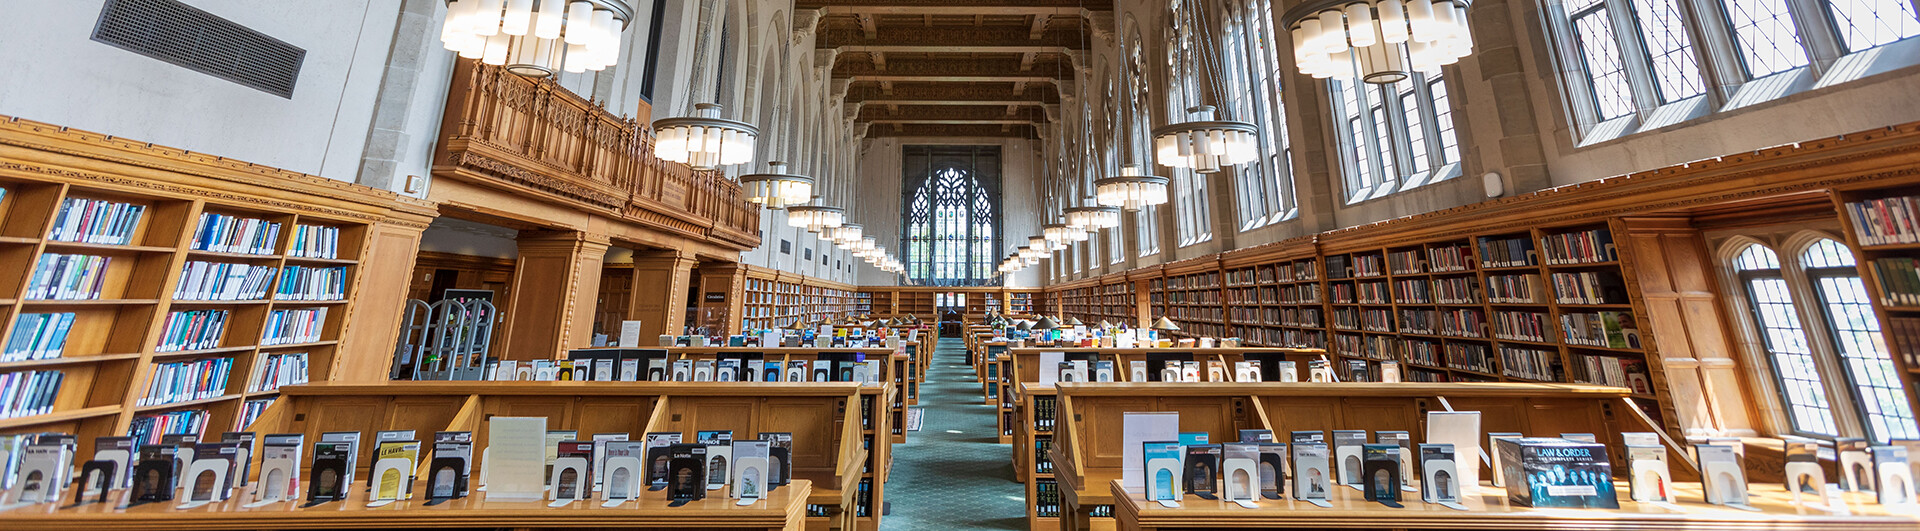 YLS Library Reading Room